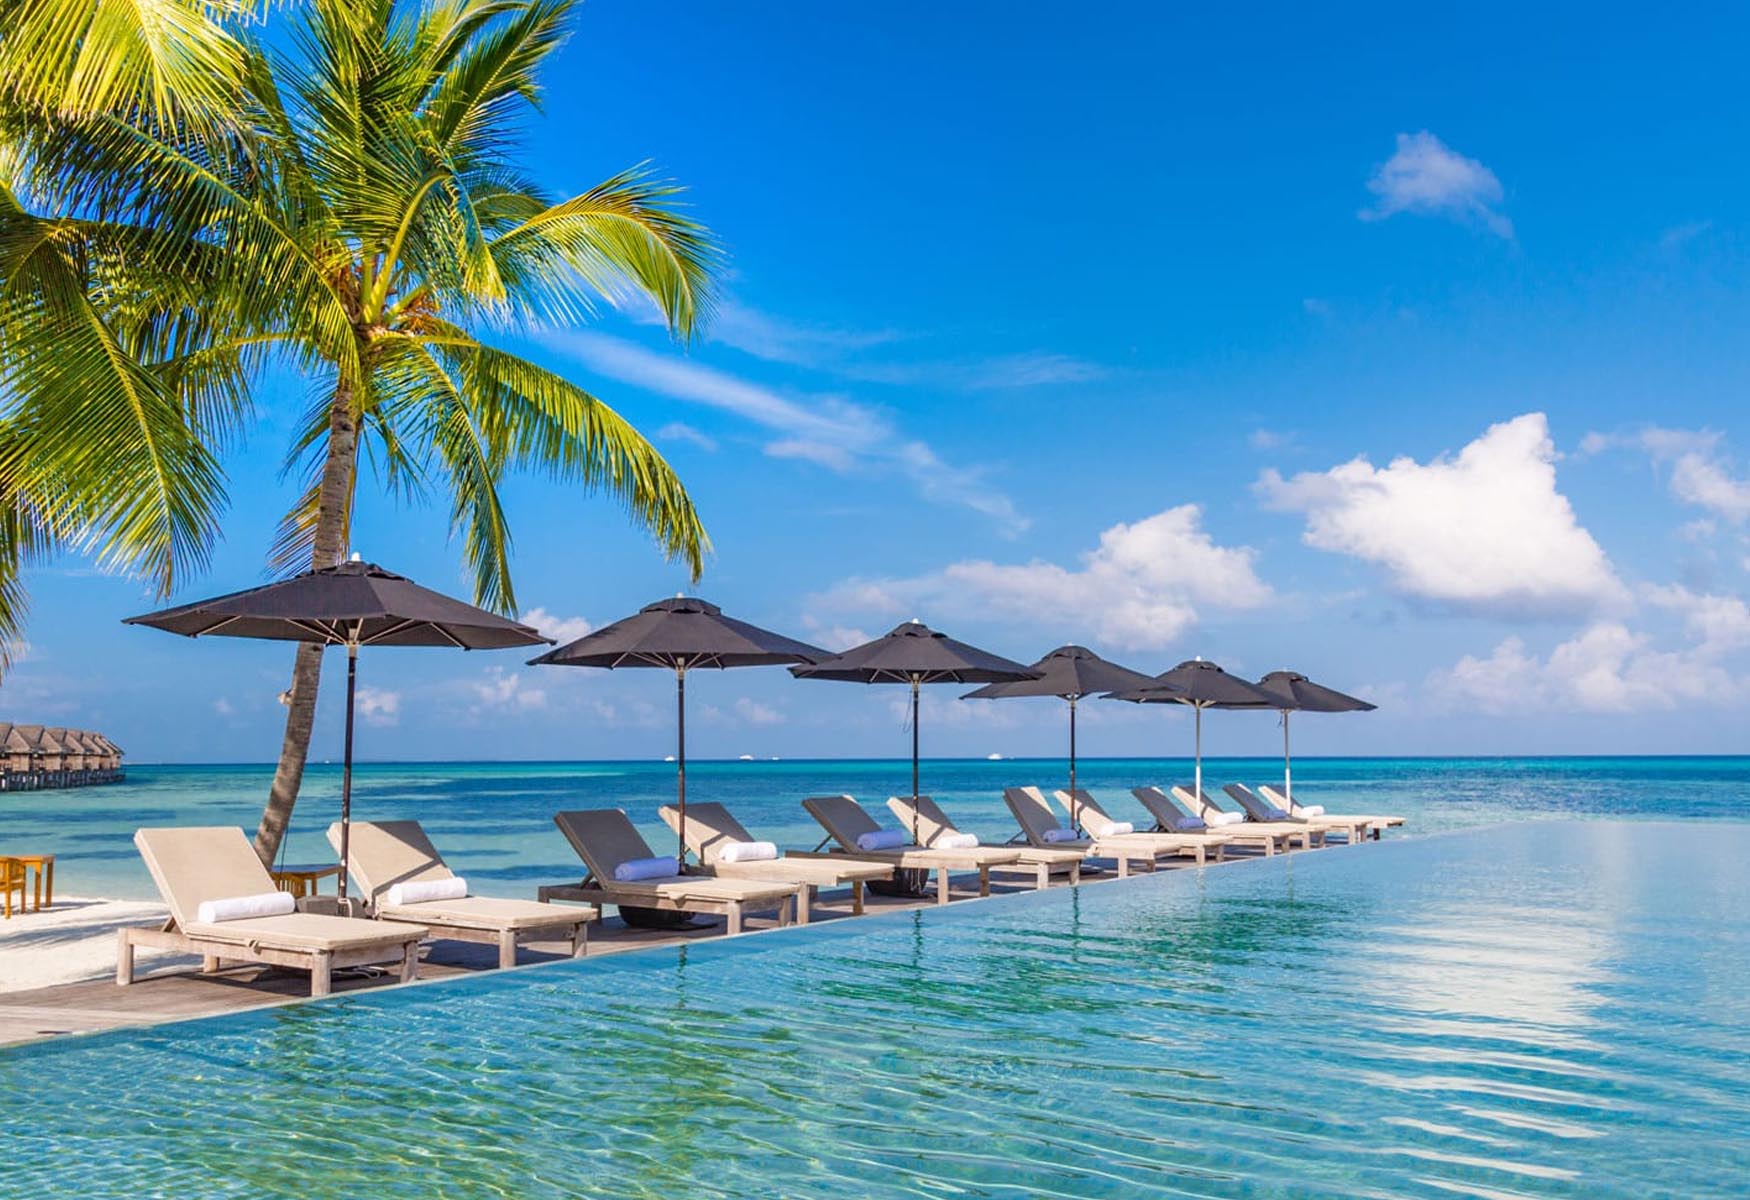 Where To Stay In Jamaica: The BEST Areas